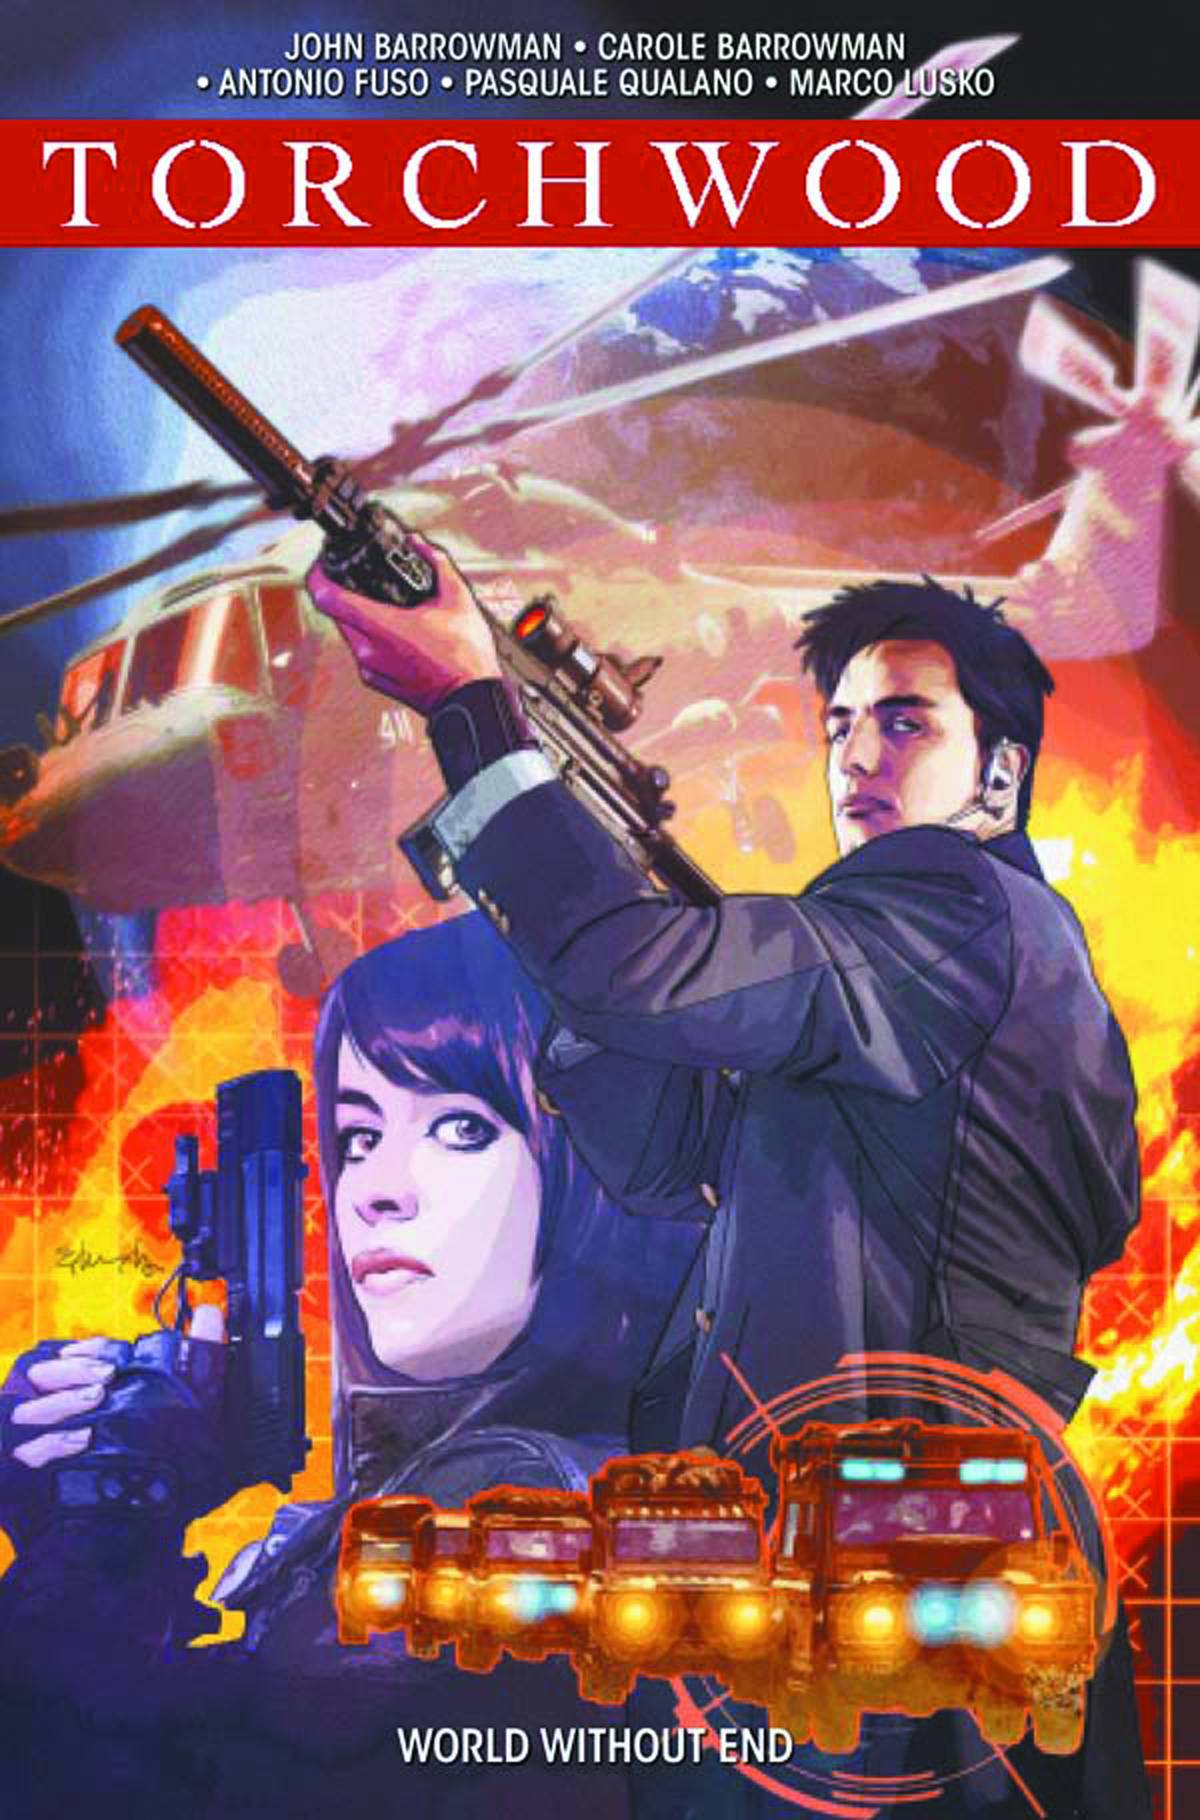 TORCHWOOD TP VOL 01 WORLD WITHOUT END